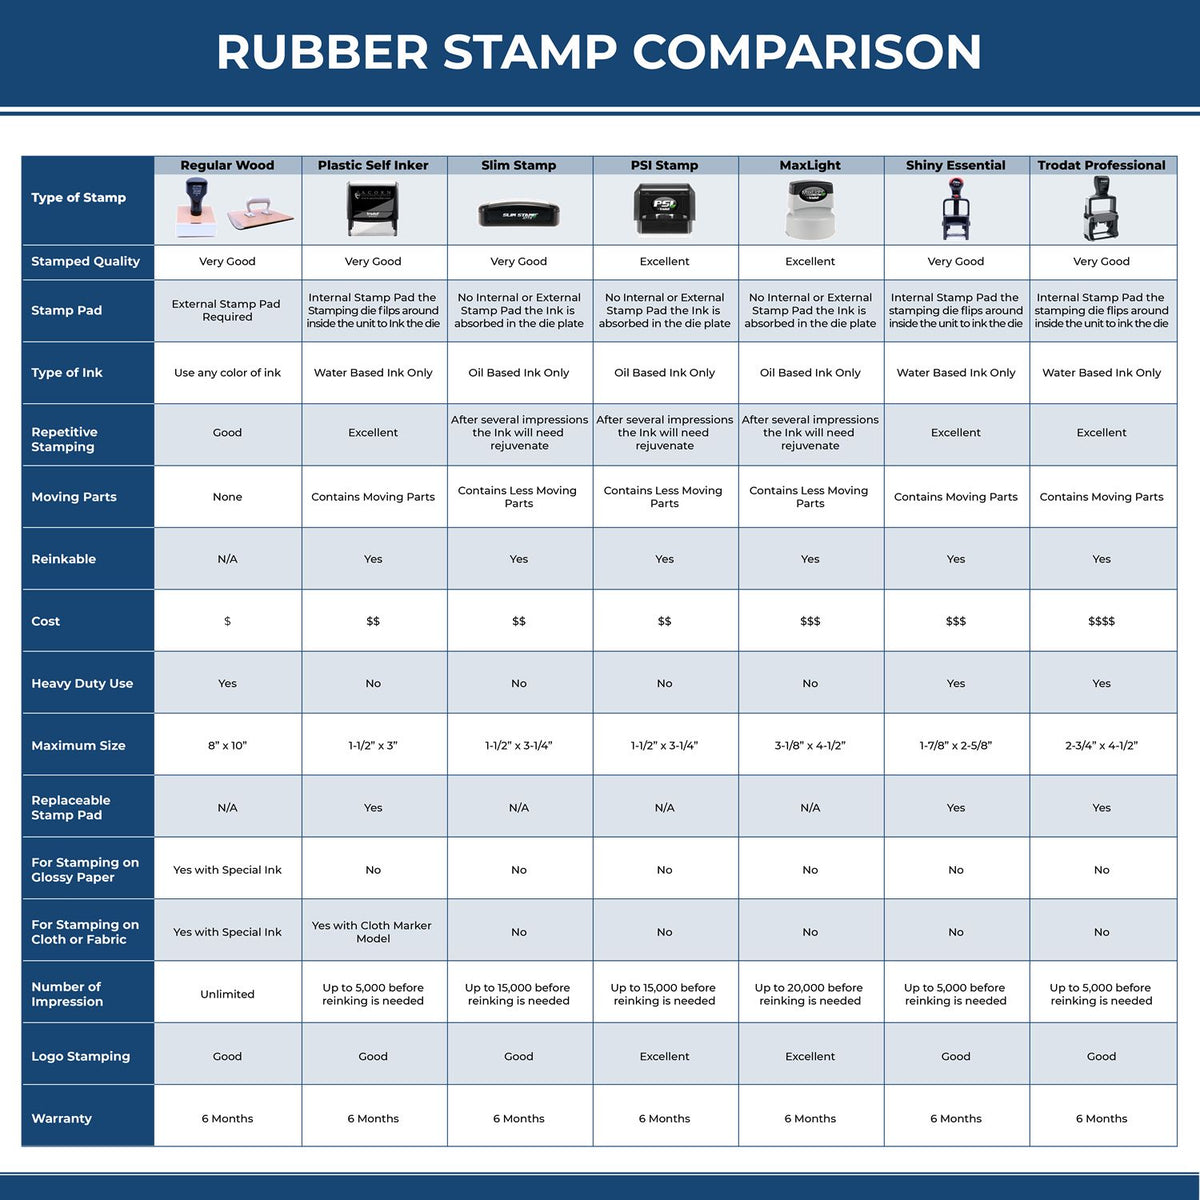 A comparison chart for the different types of mount models available for the Hawaii Professional Engineer Seal Stamp.